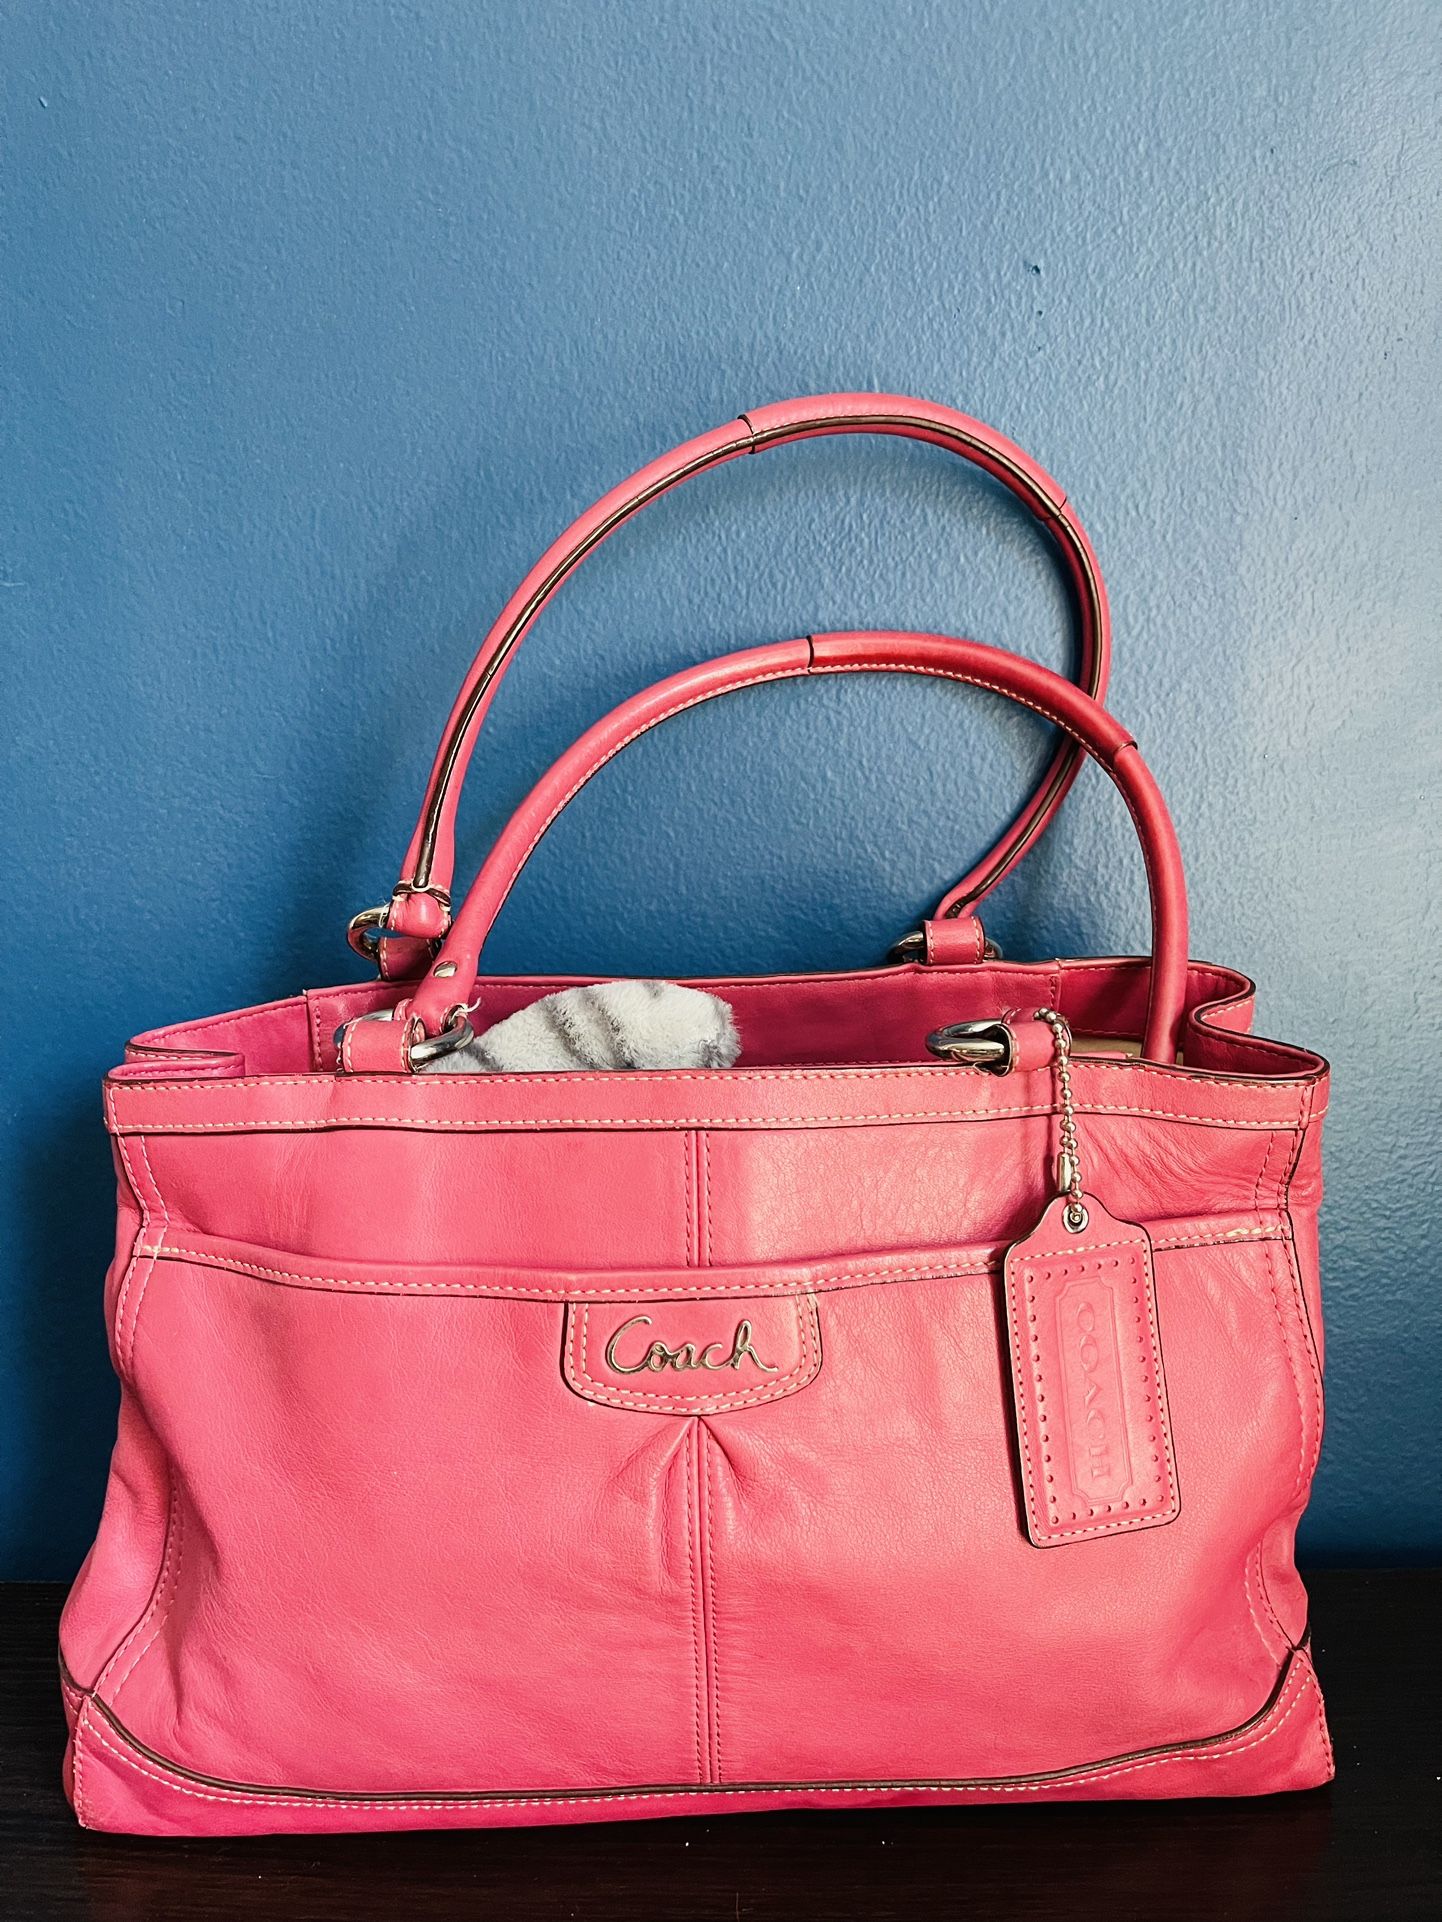 Coach "Ashley" CORAL Tote/Satchel/Handbag pink,good quality,soft and high class 